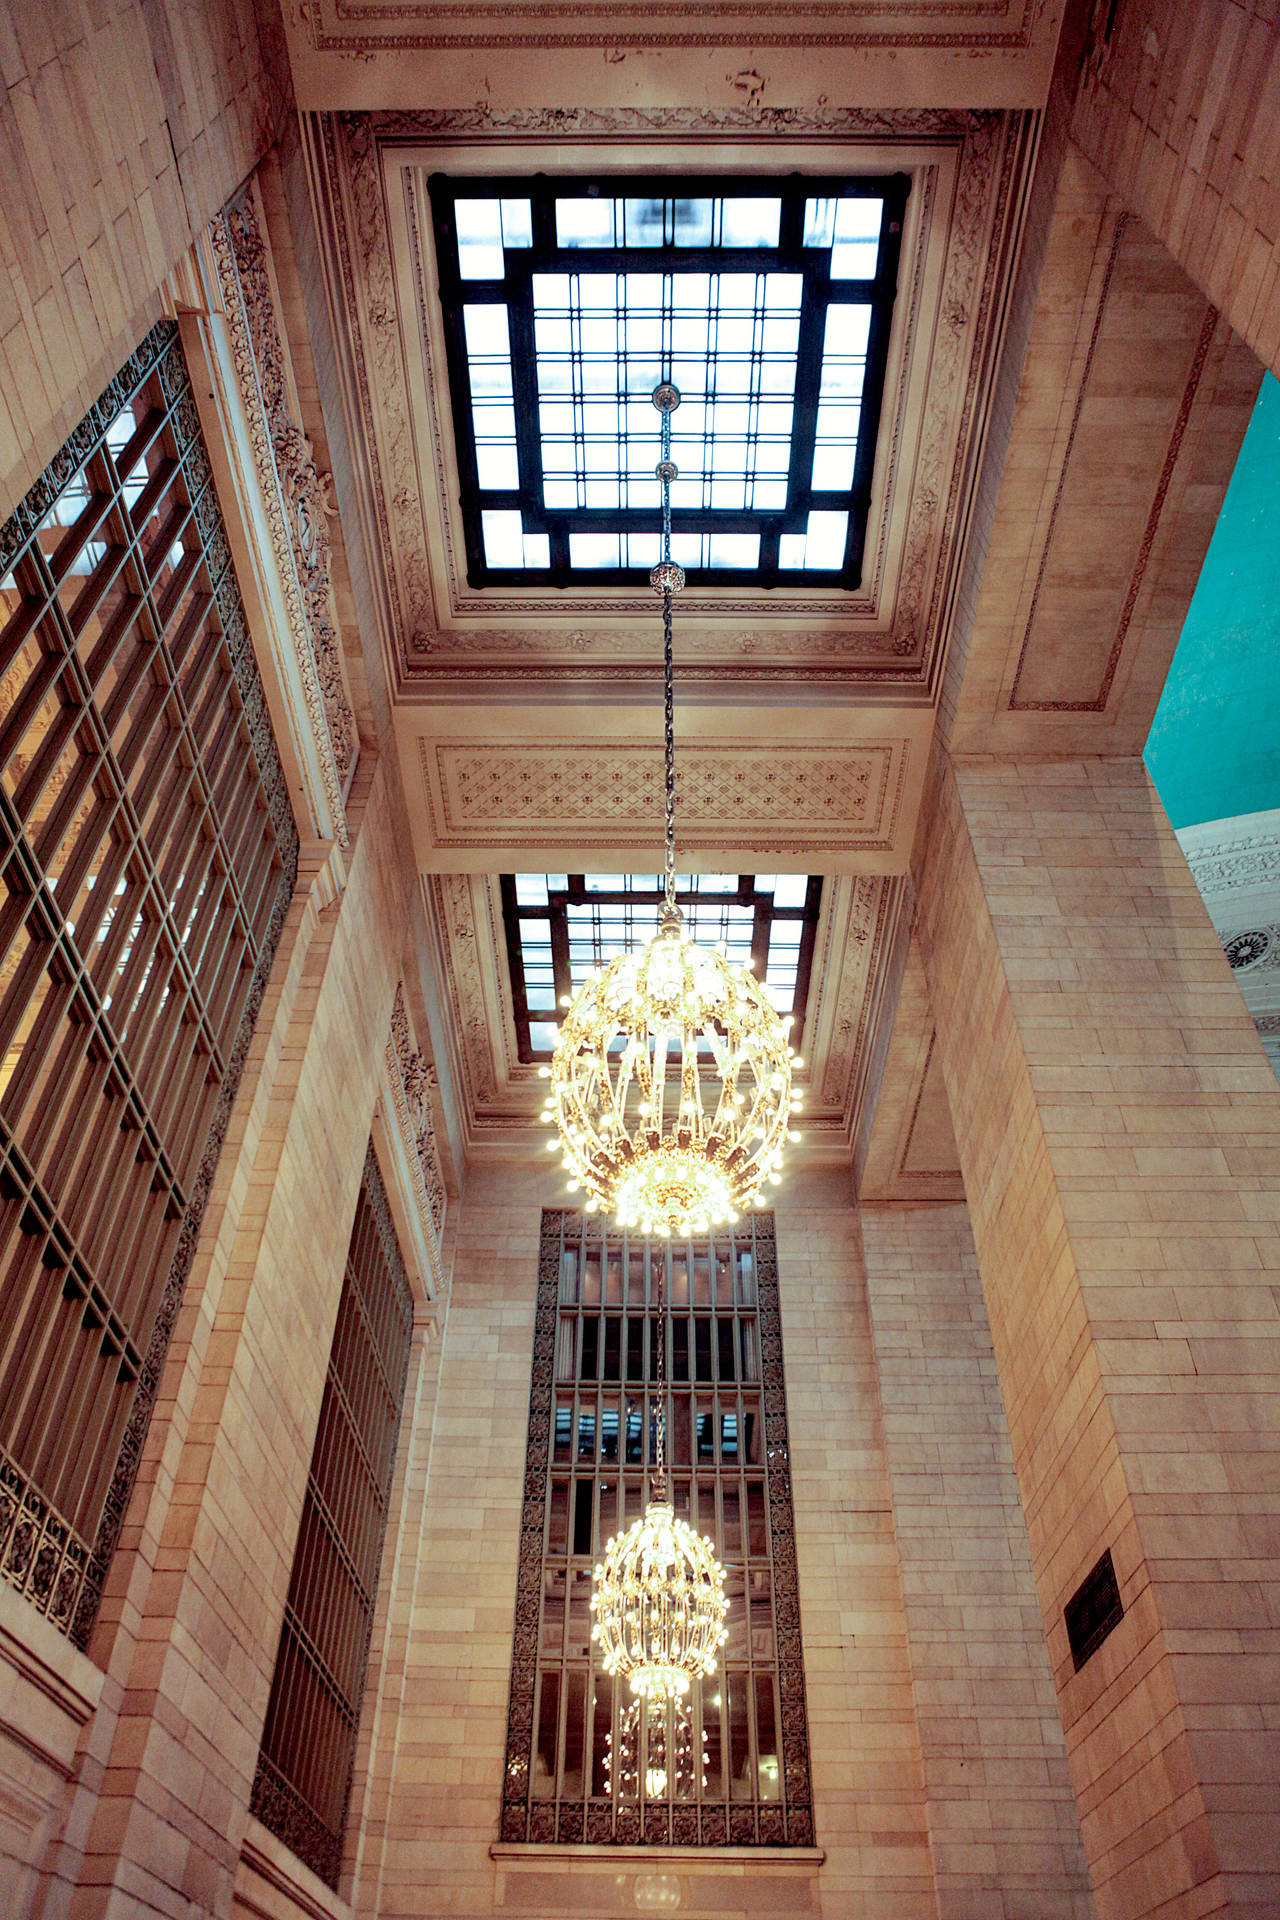 Grand Central Station Chandeliers Wallpaper